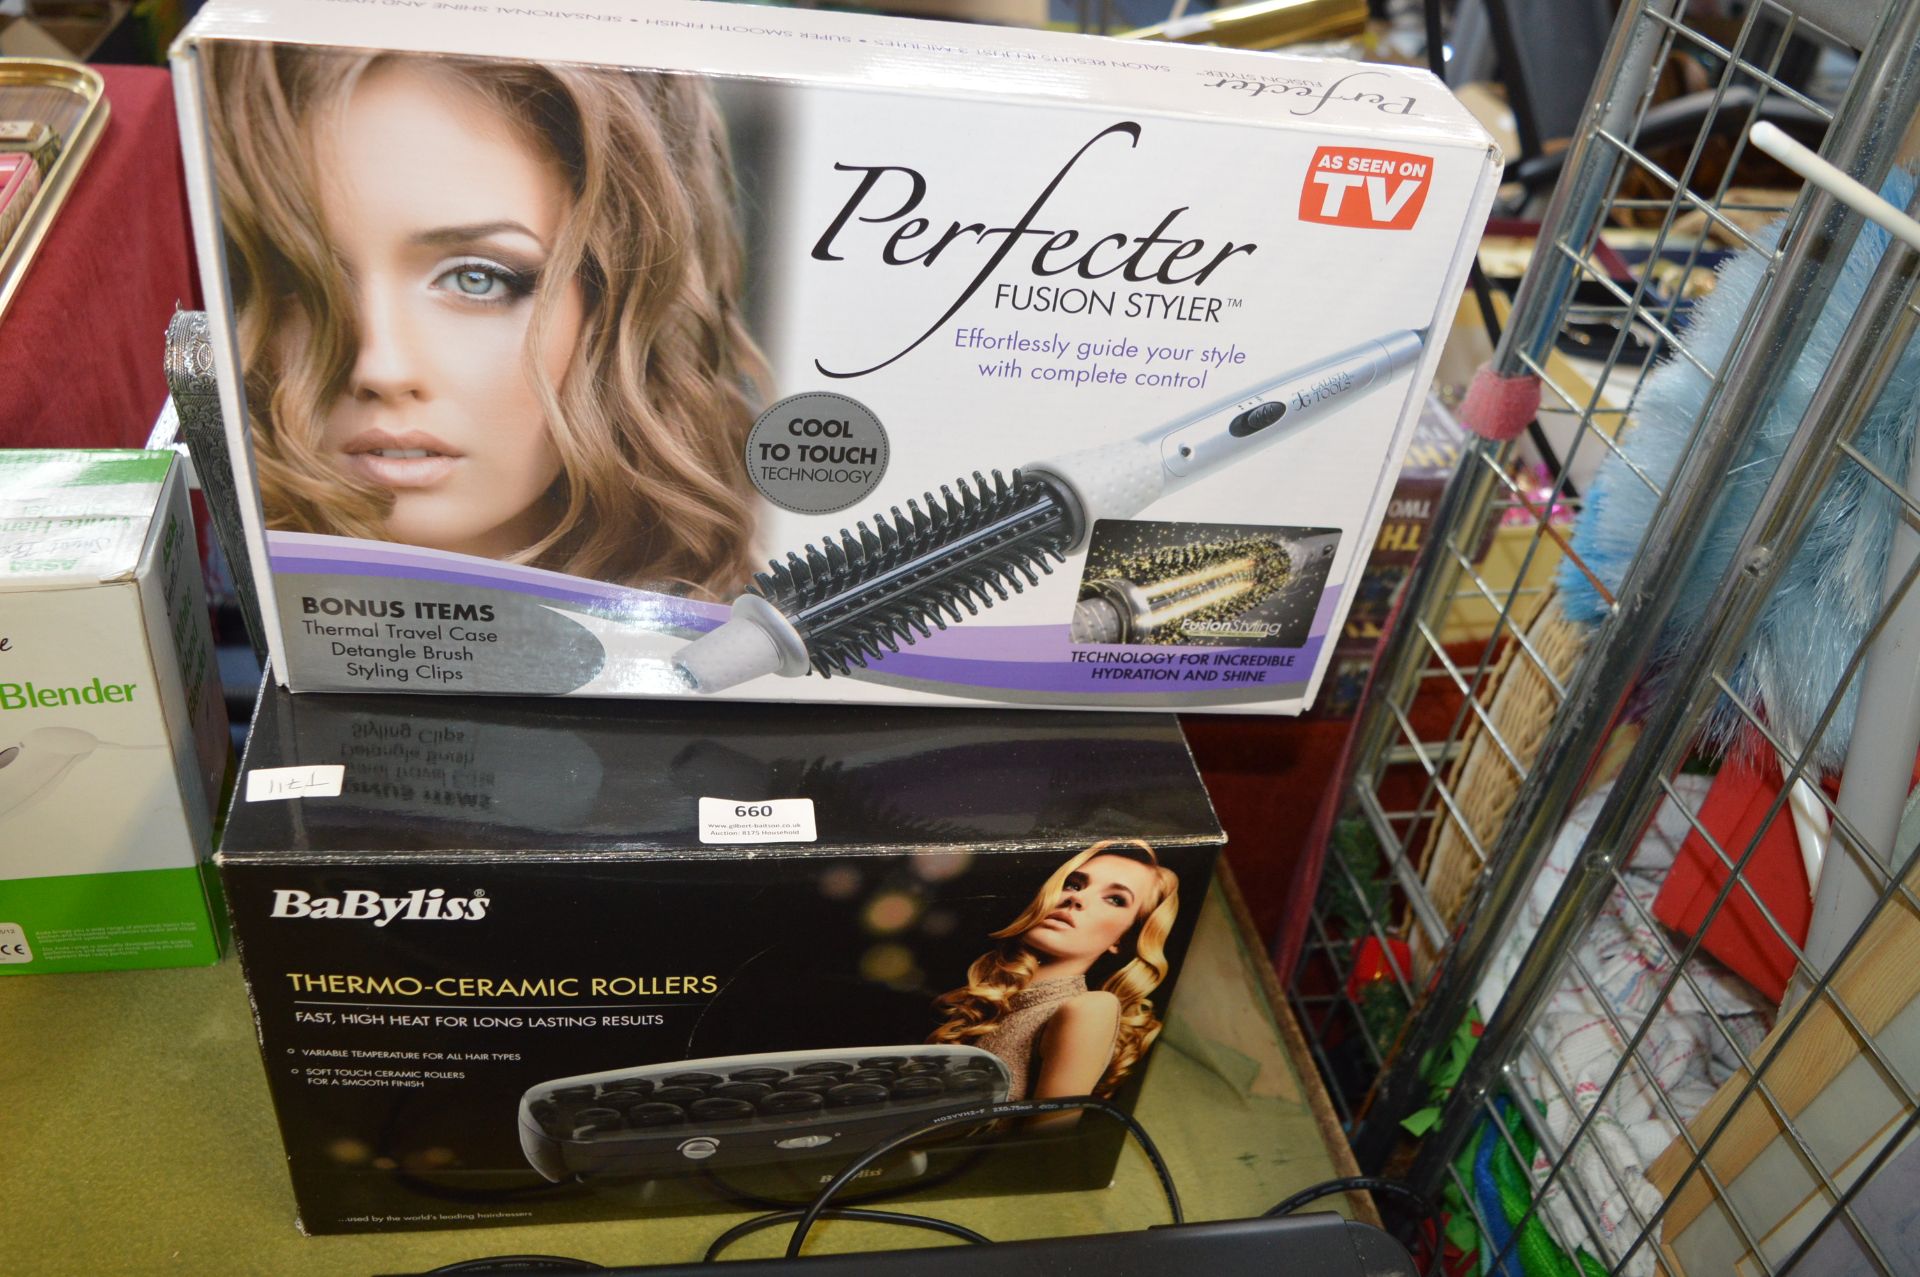 Boxed Babyliss Ceramic Hair Roller Set plus a Perf